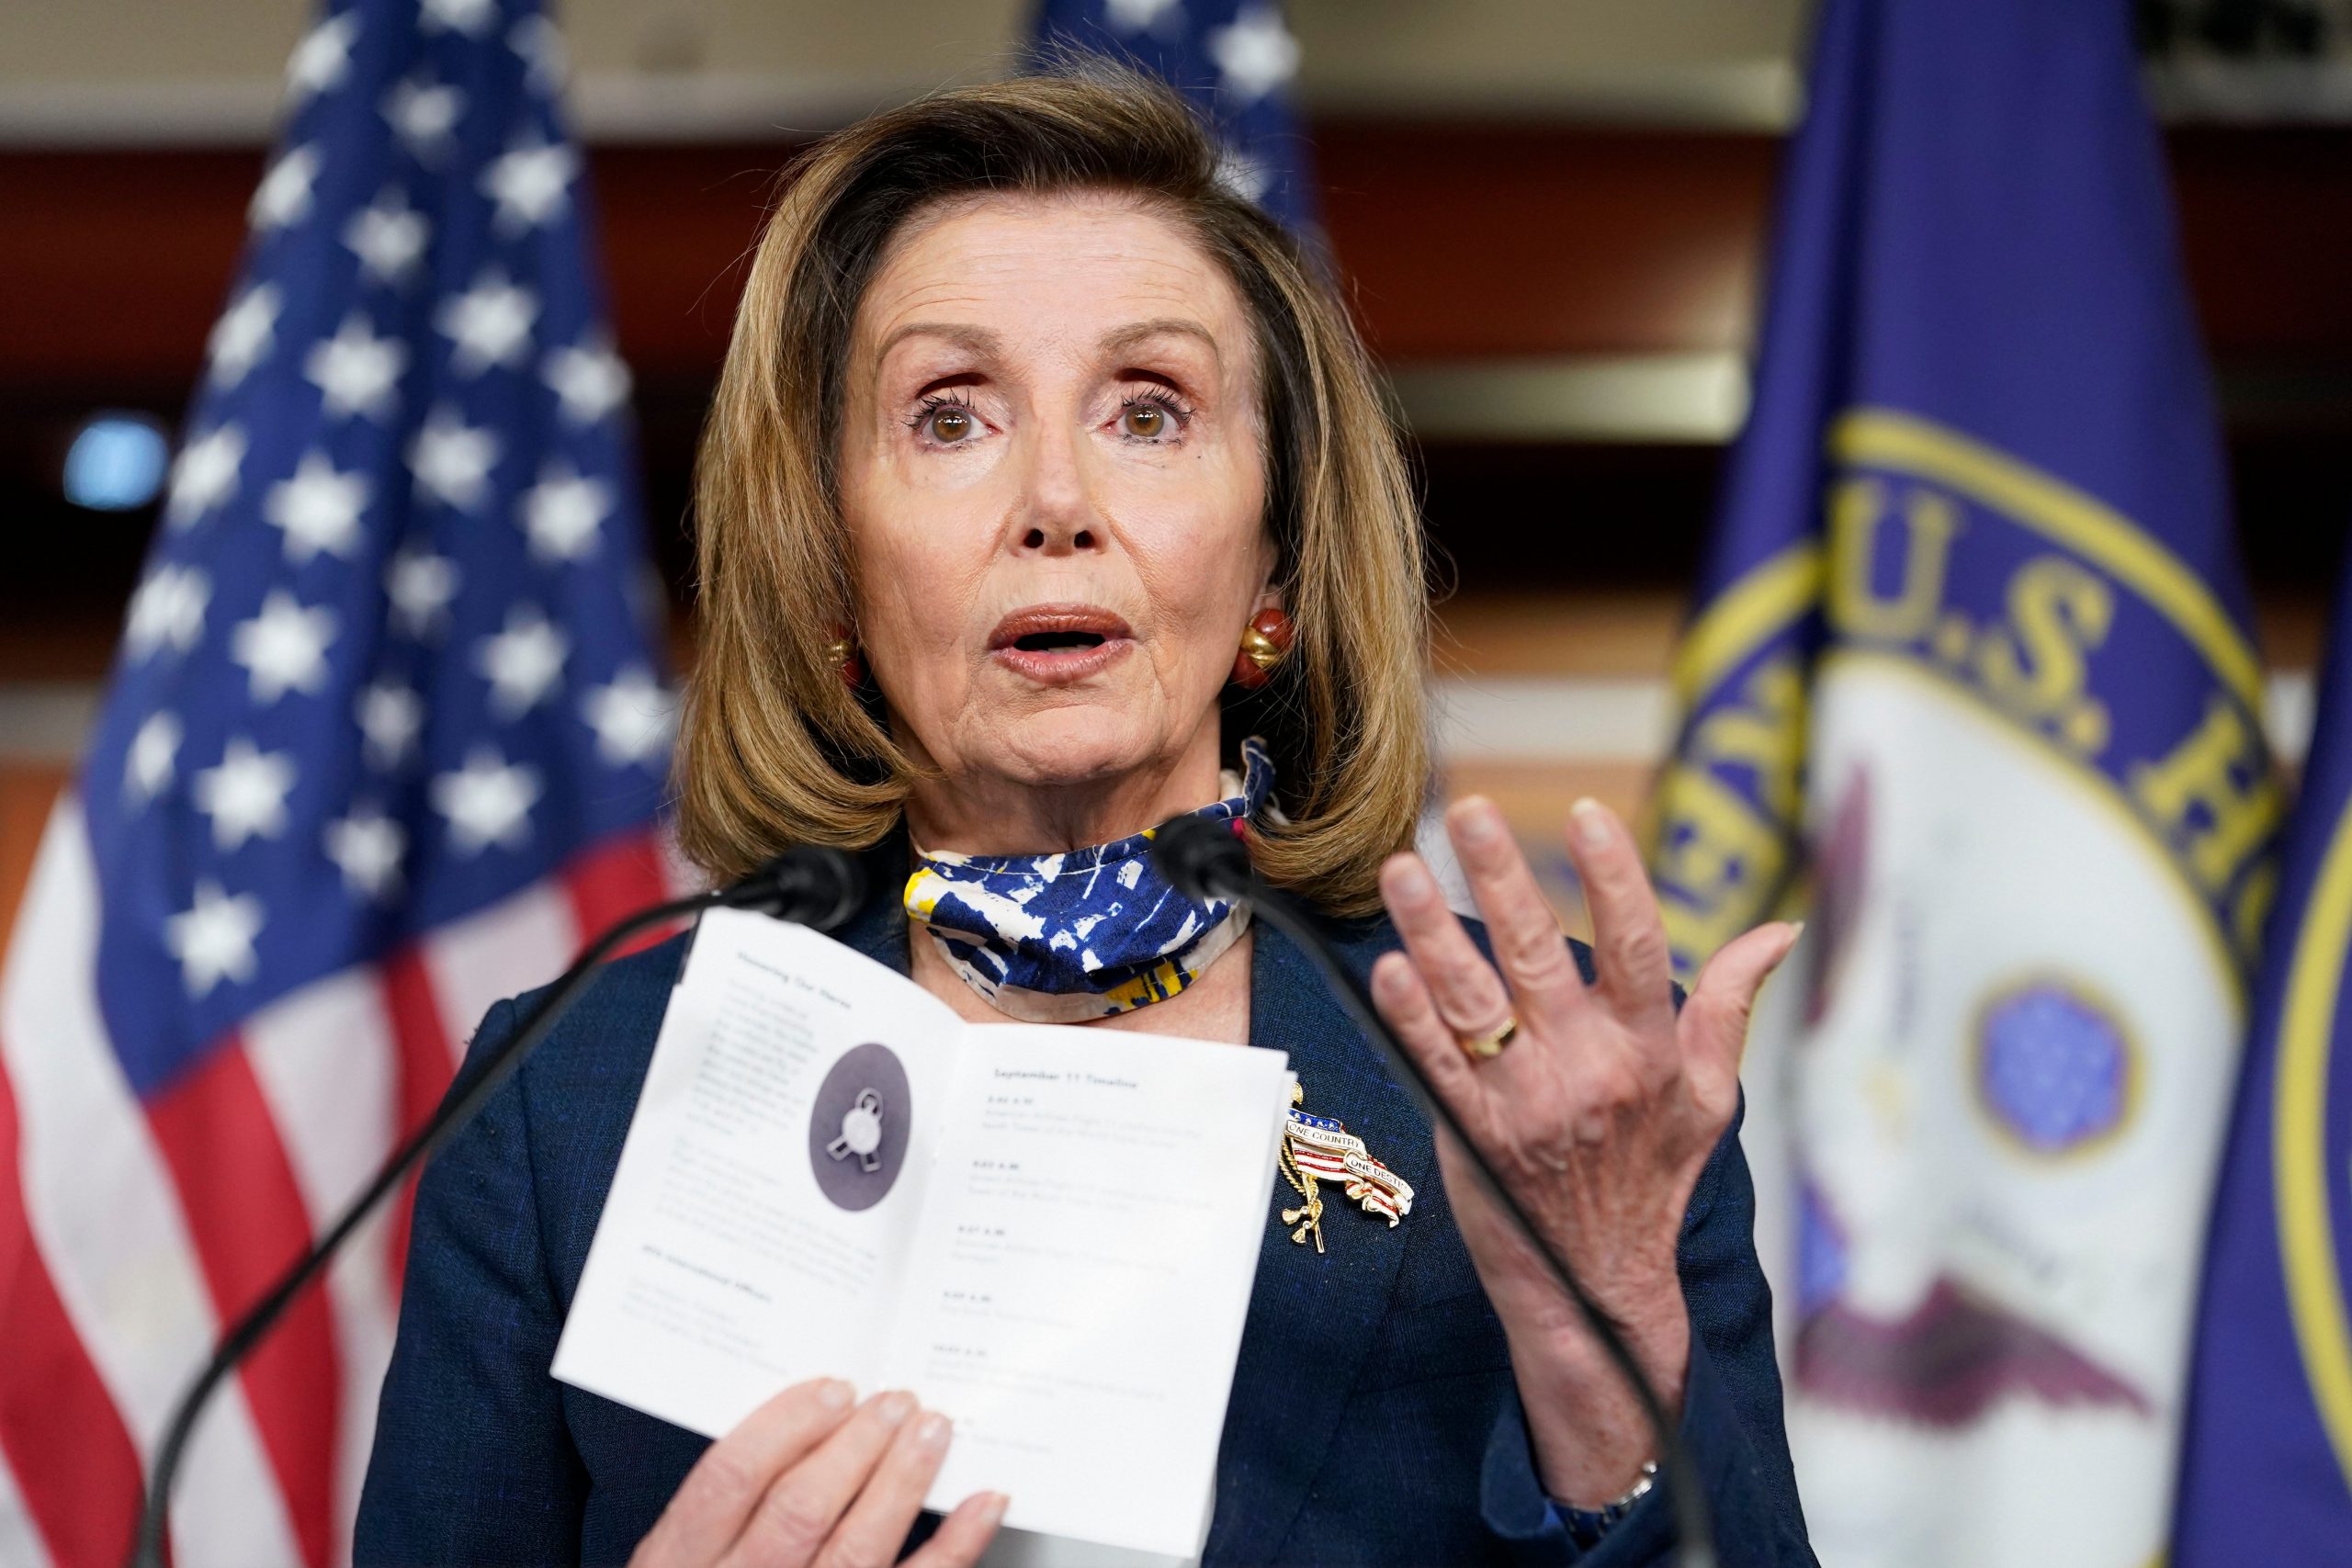 Nancy Pelosi fights back tears reacting to attack on husband: ‘I was very scared’